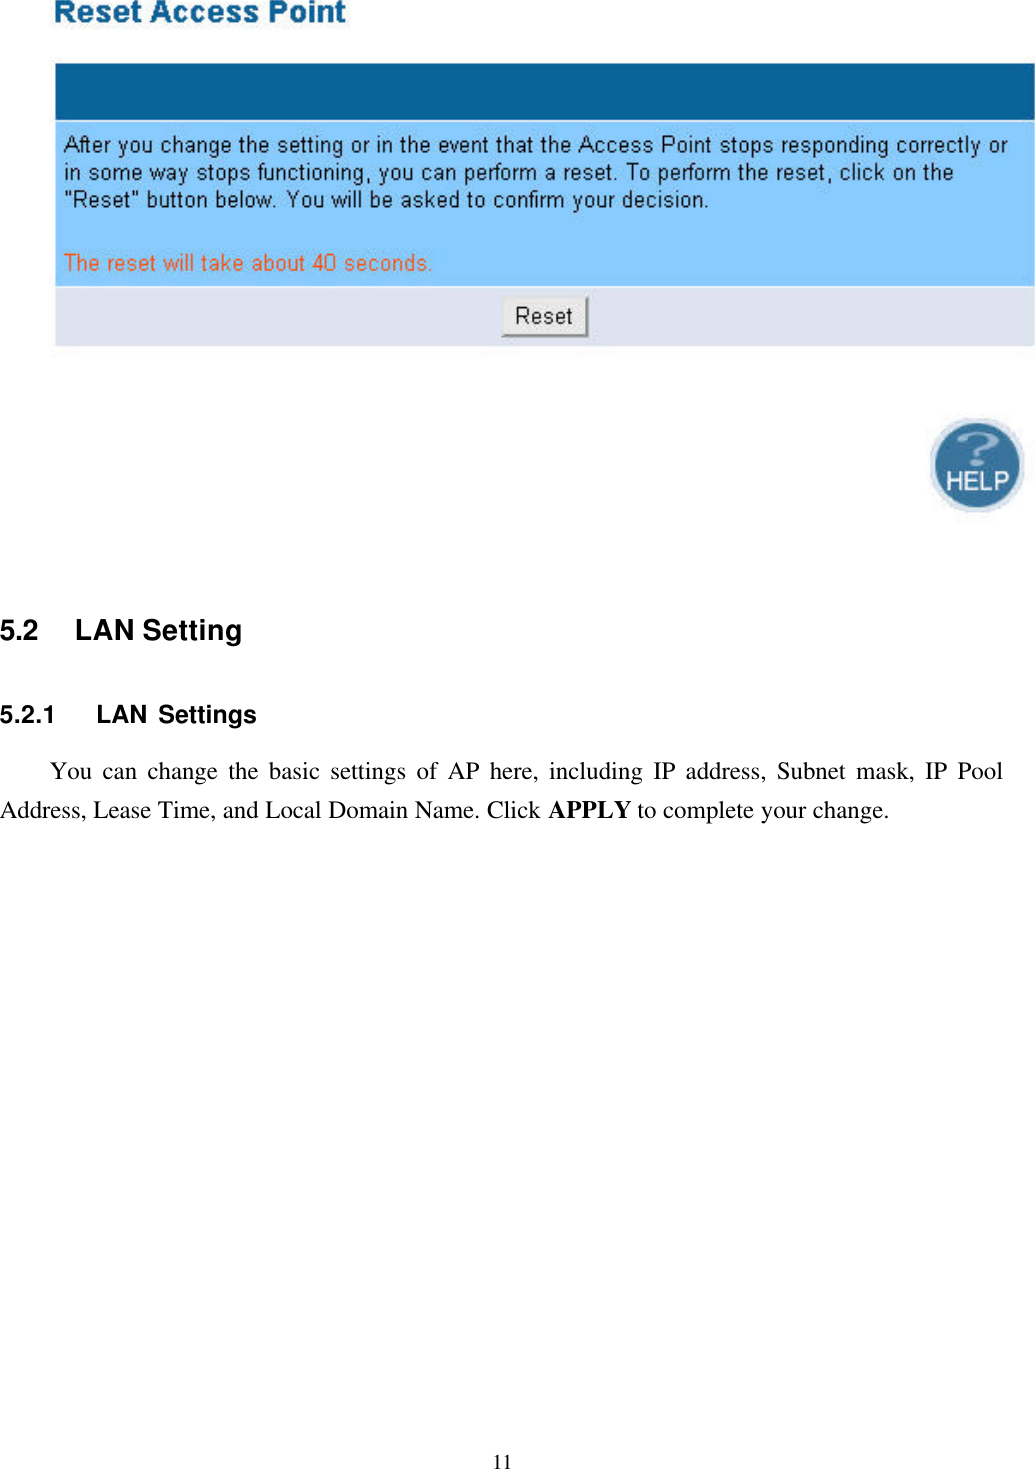 11  5.2 LAN Setting5.2.1   LAN SettingsYou can change the basic settings of AP here, including IP address, Subnet mask, IP PoolAddress, Lease Time, and Local Domain Name. Click APPLY to complete your change.